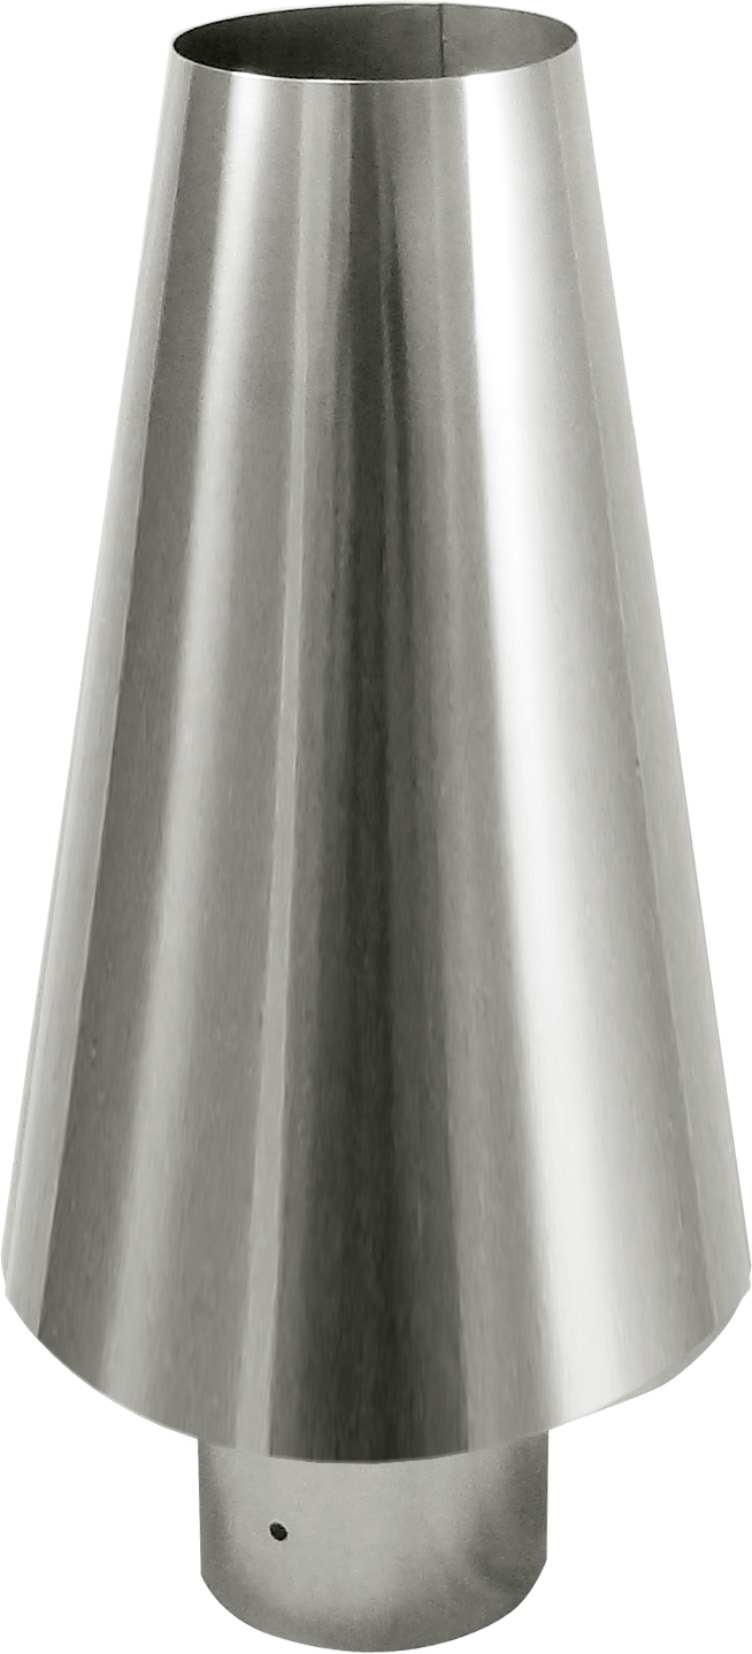 Wind tailpipes / conical tubes